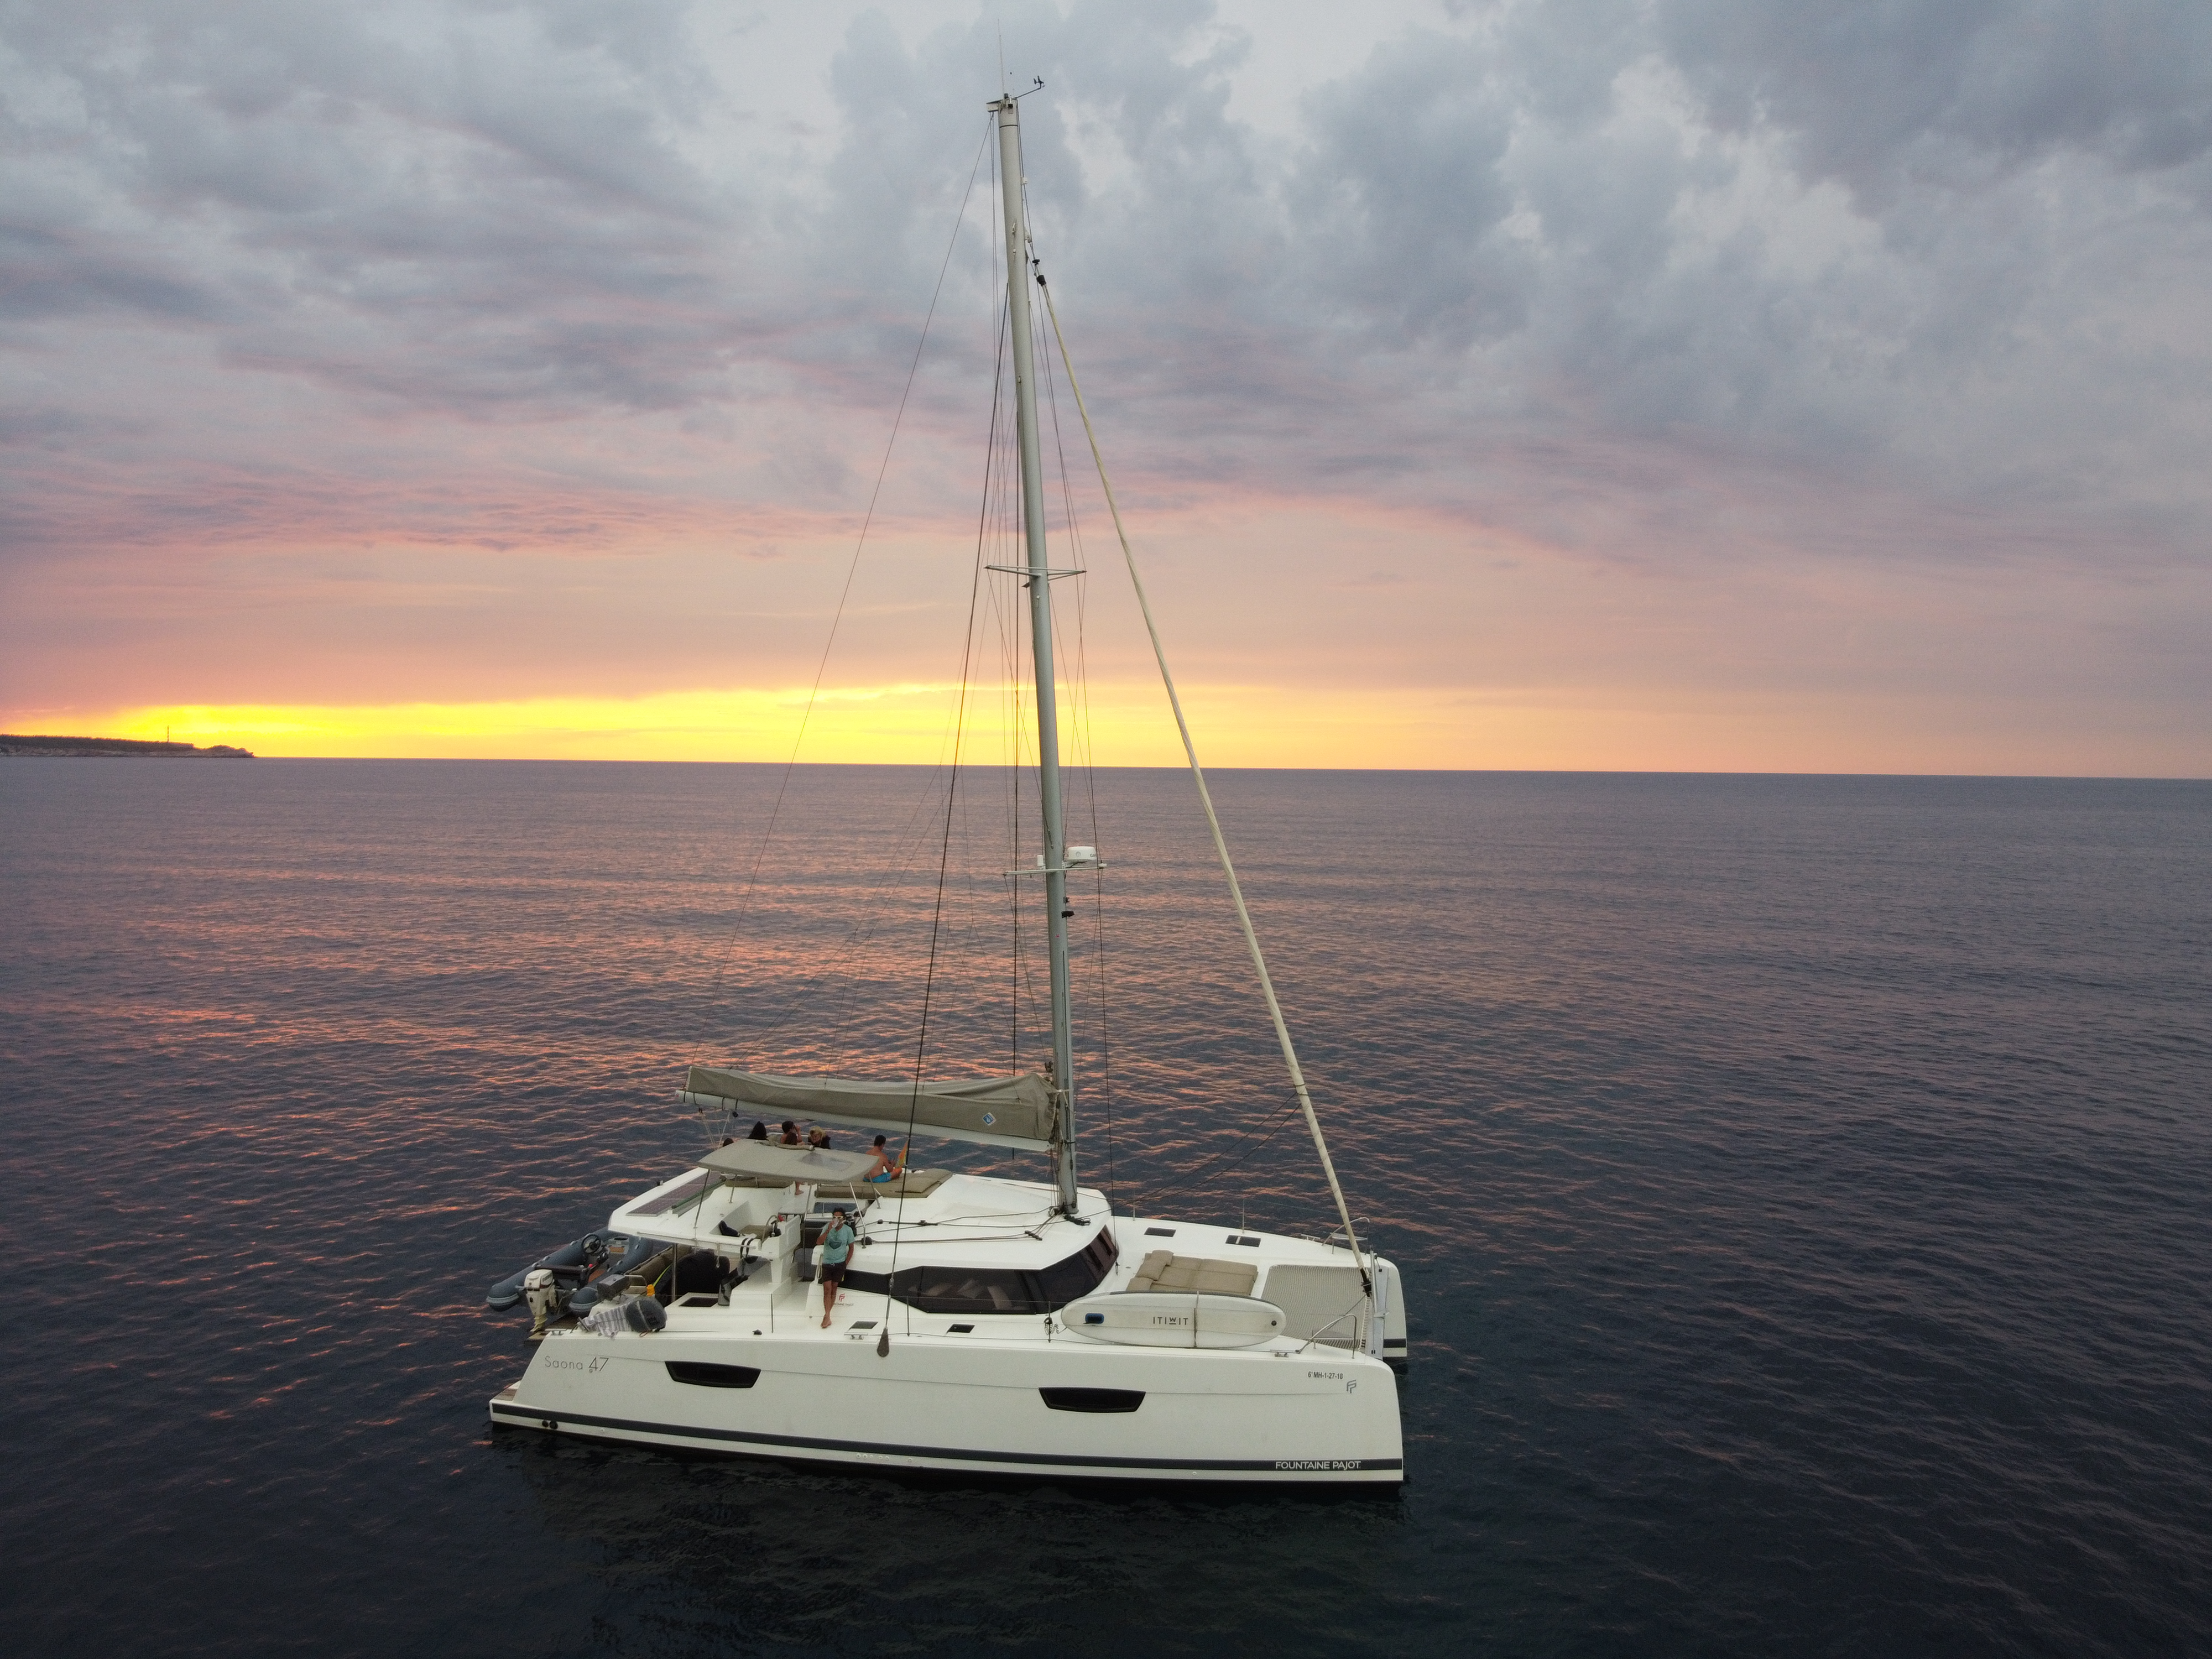 Discover the new offer of Catamarán in Balearics Islands